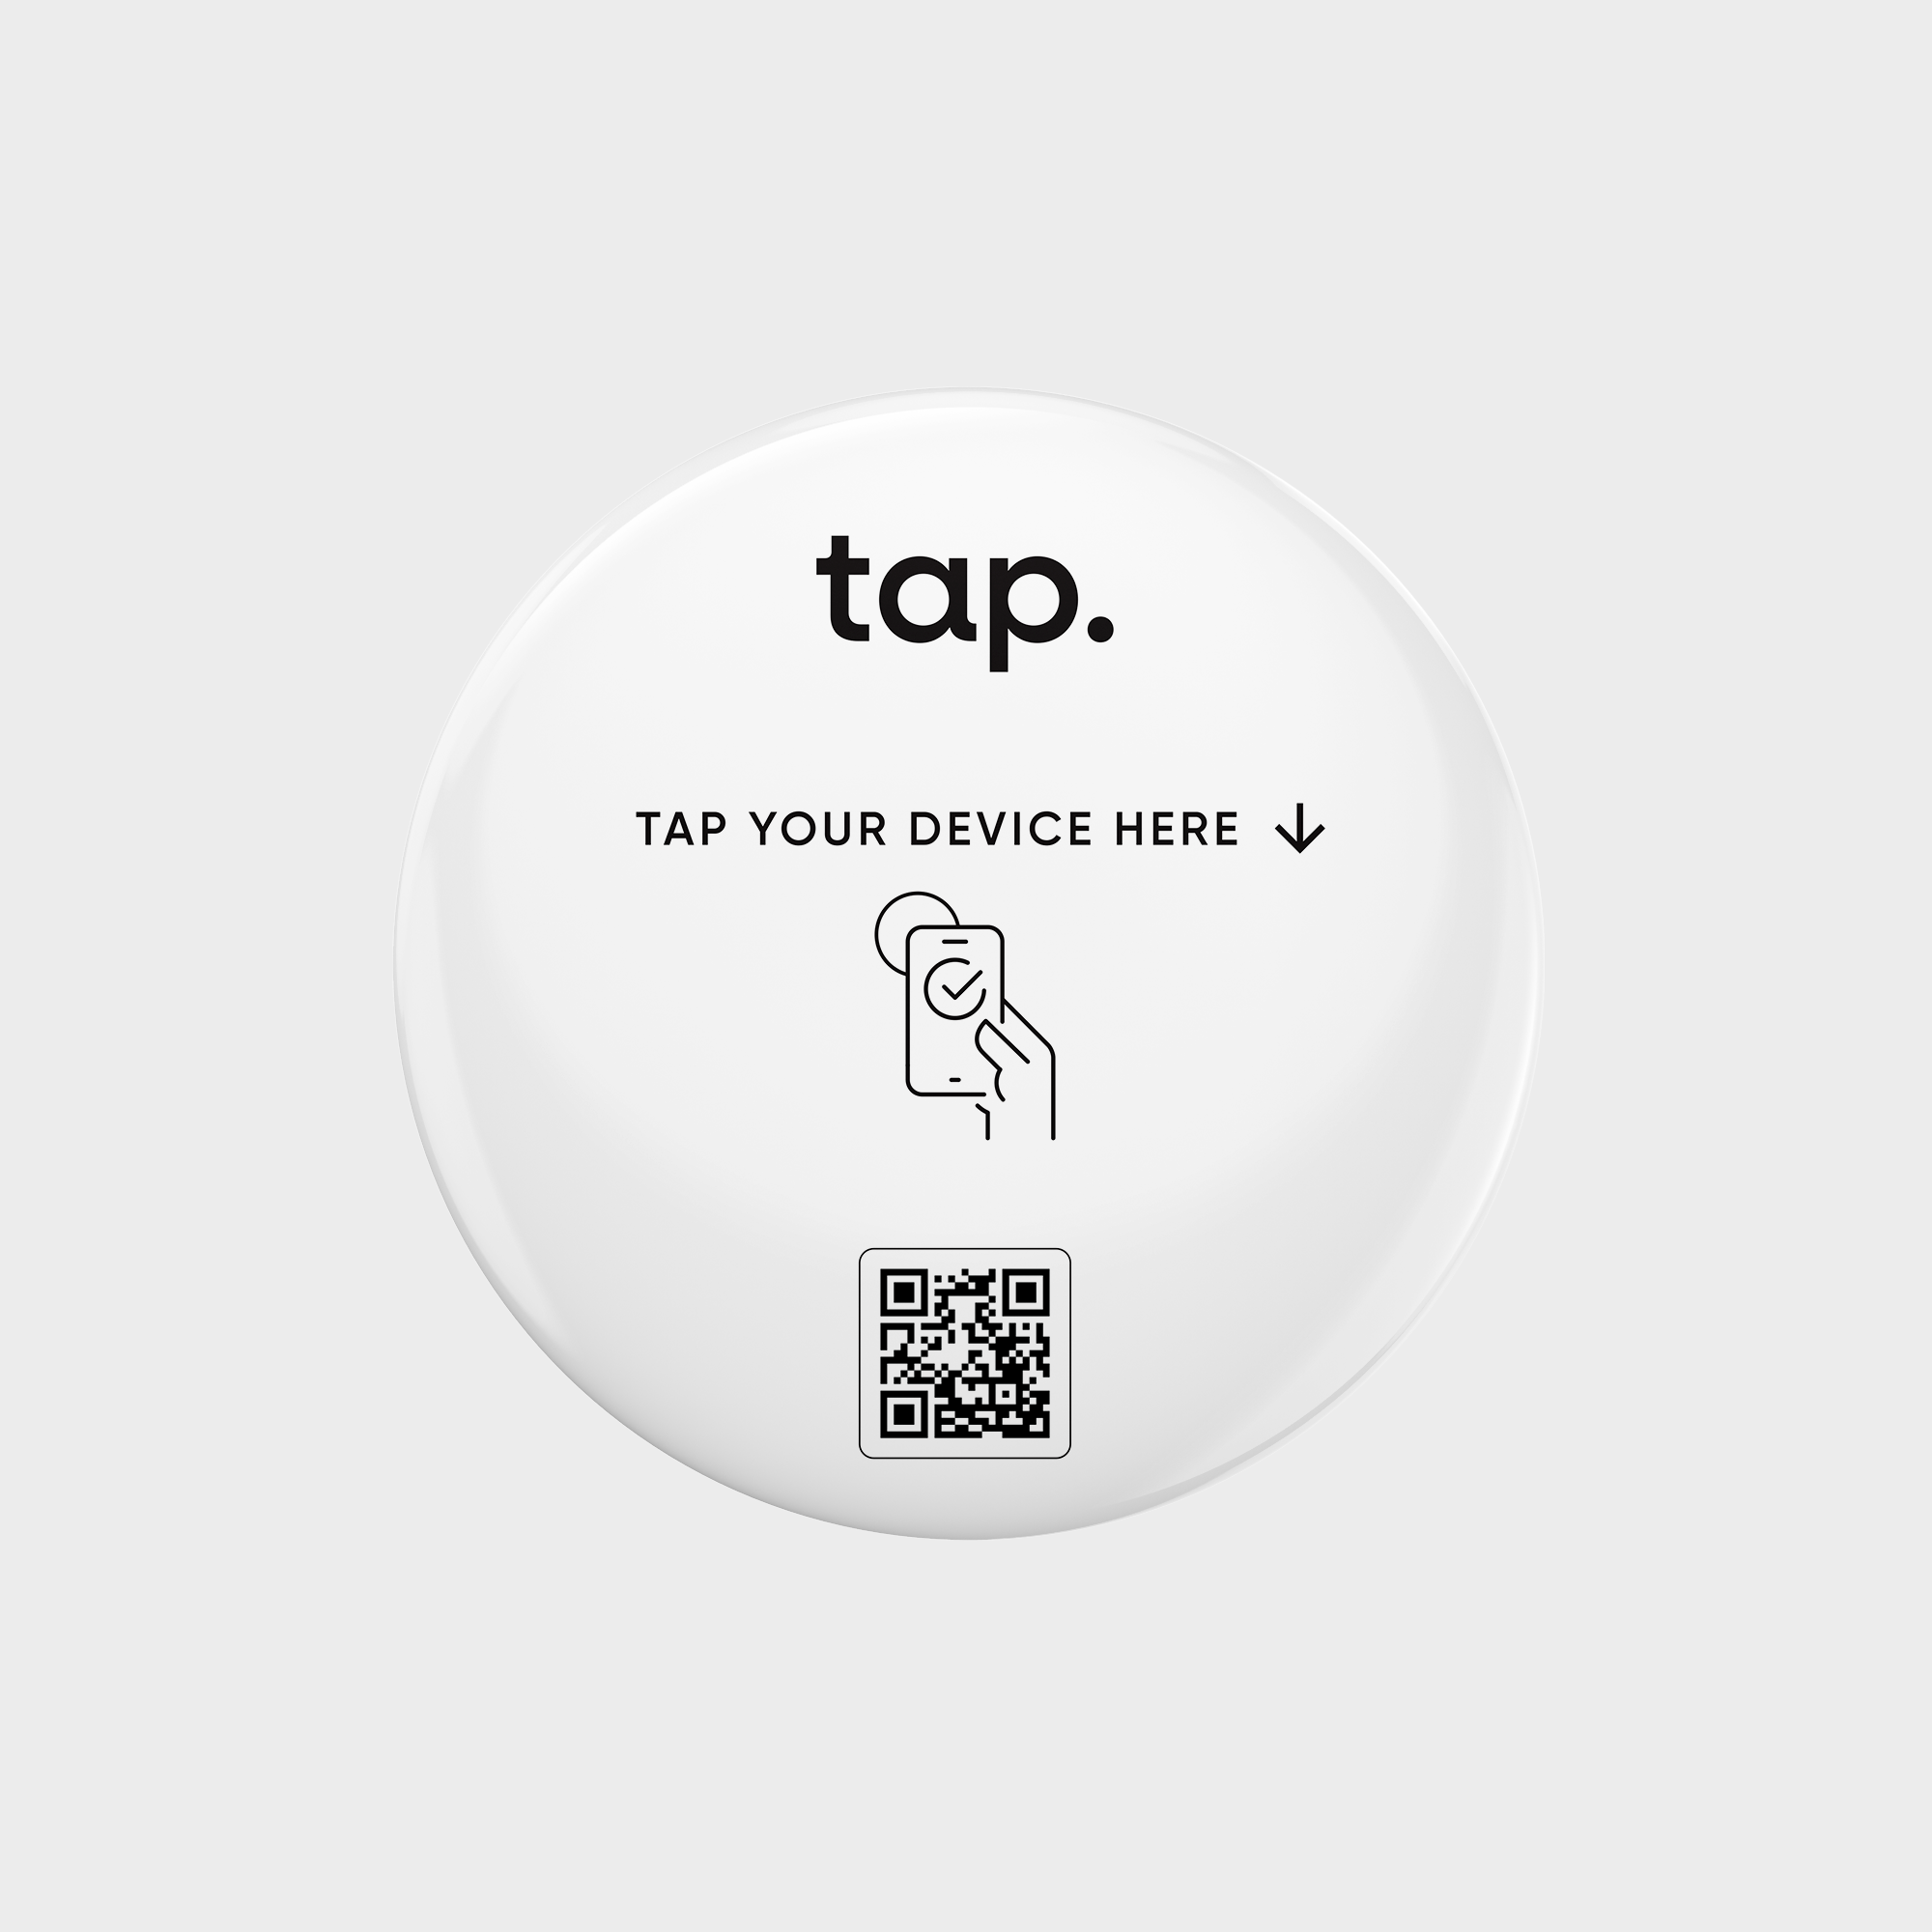 White NFC tag with tap." text, device tapping icon, and QR code for contactless interaction.